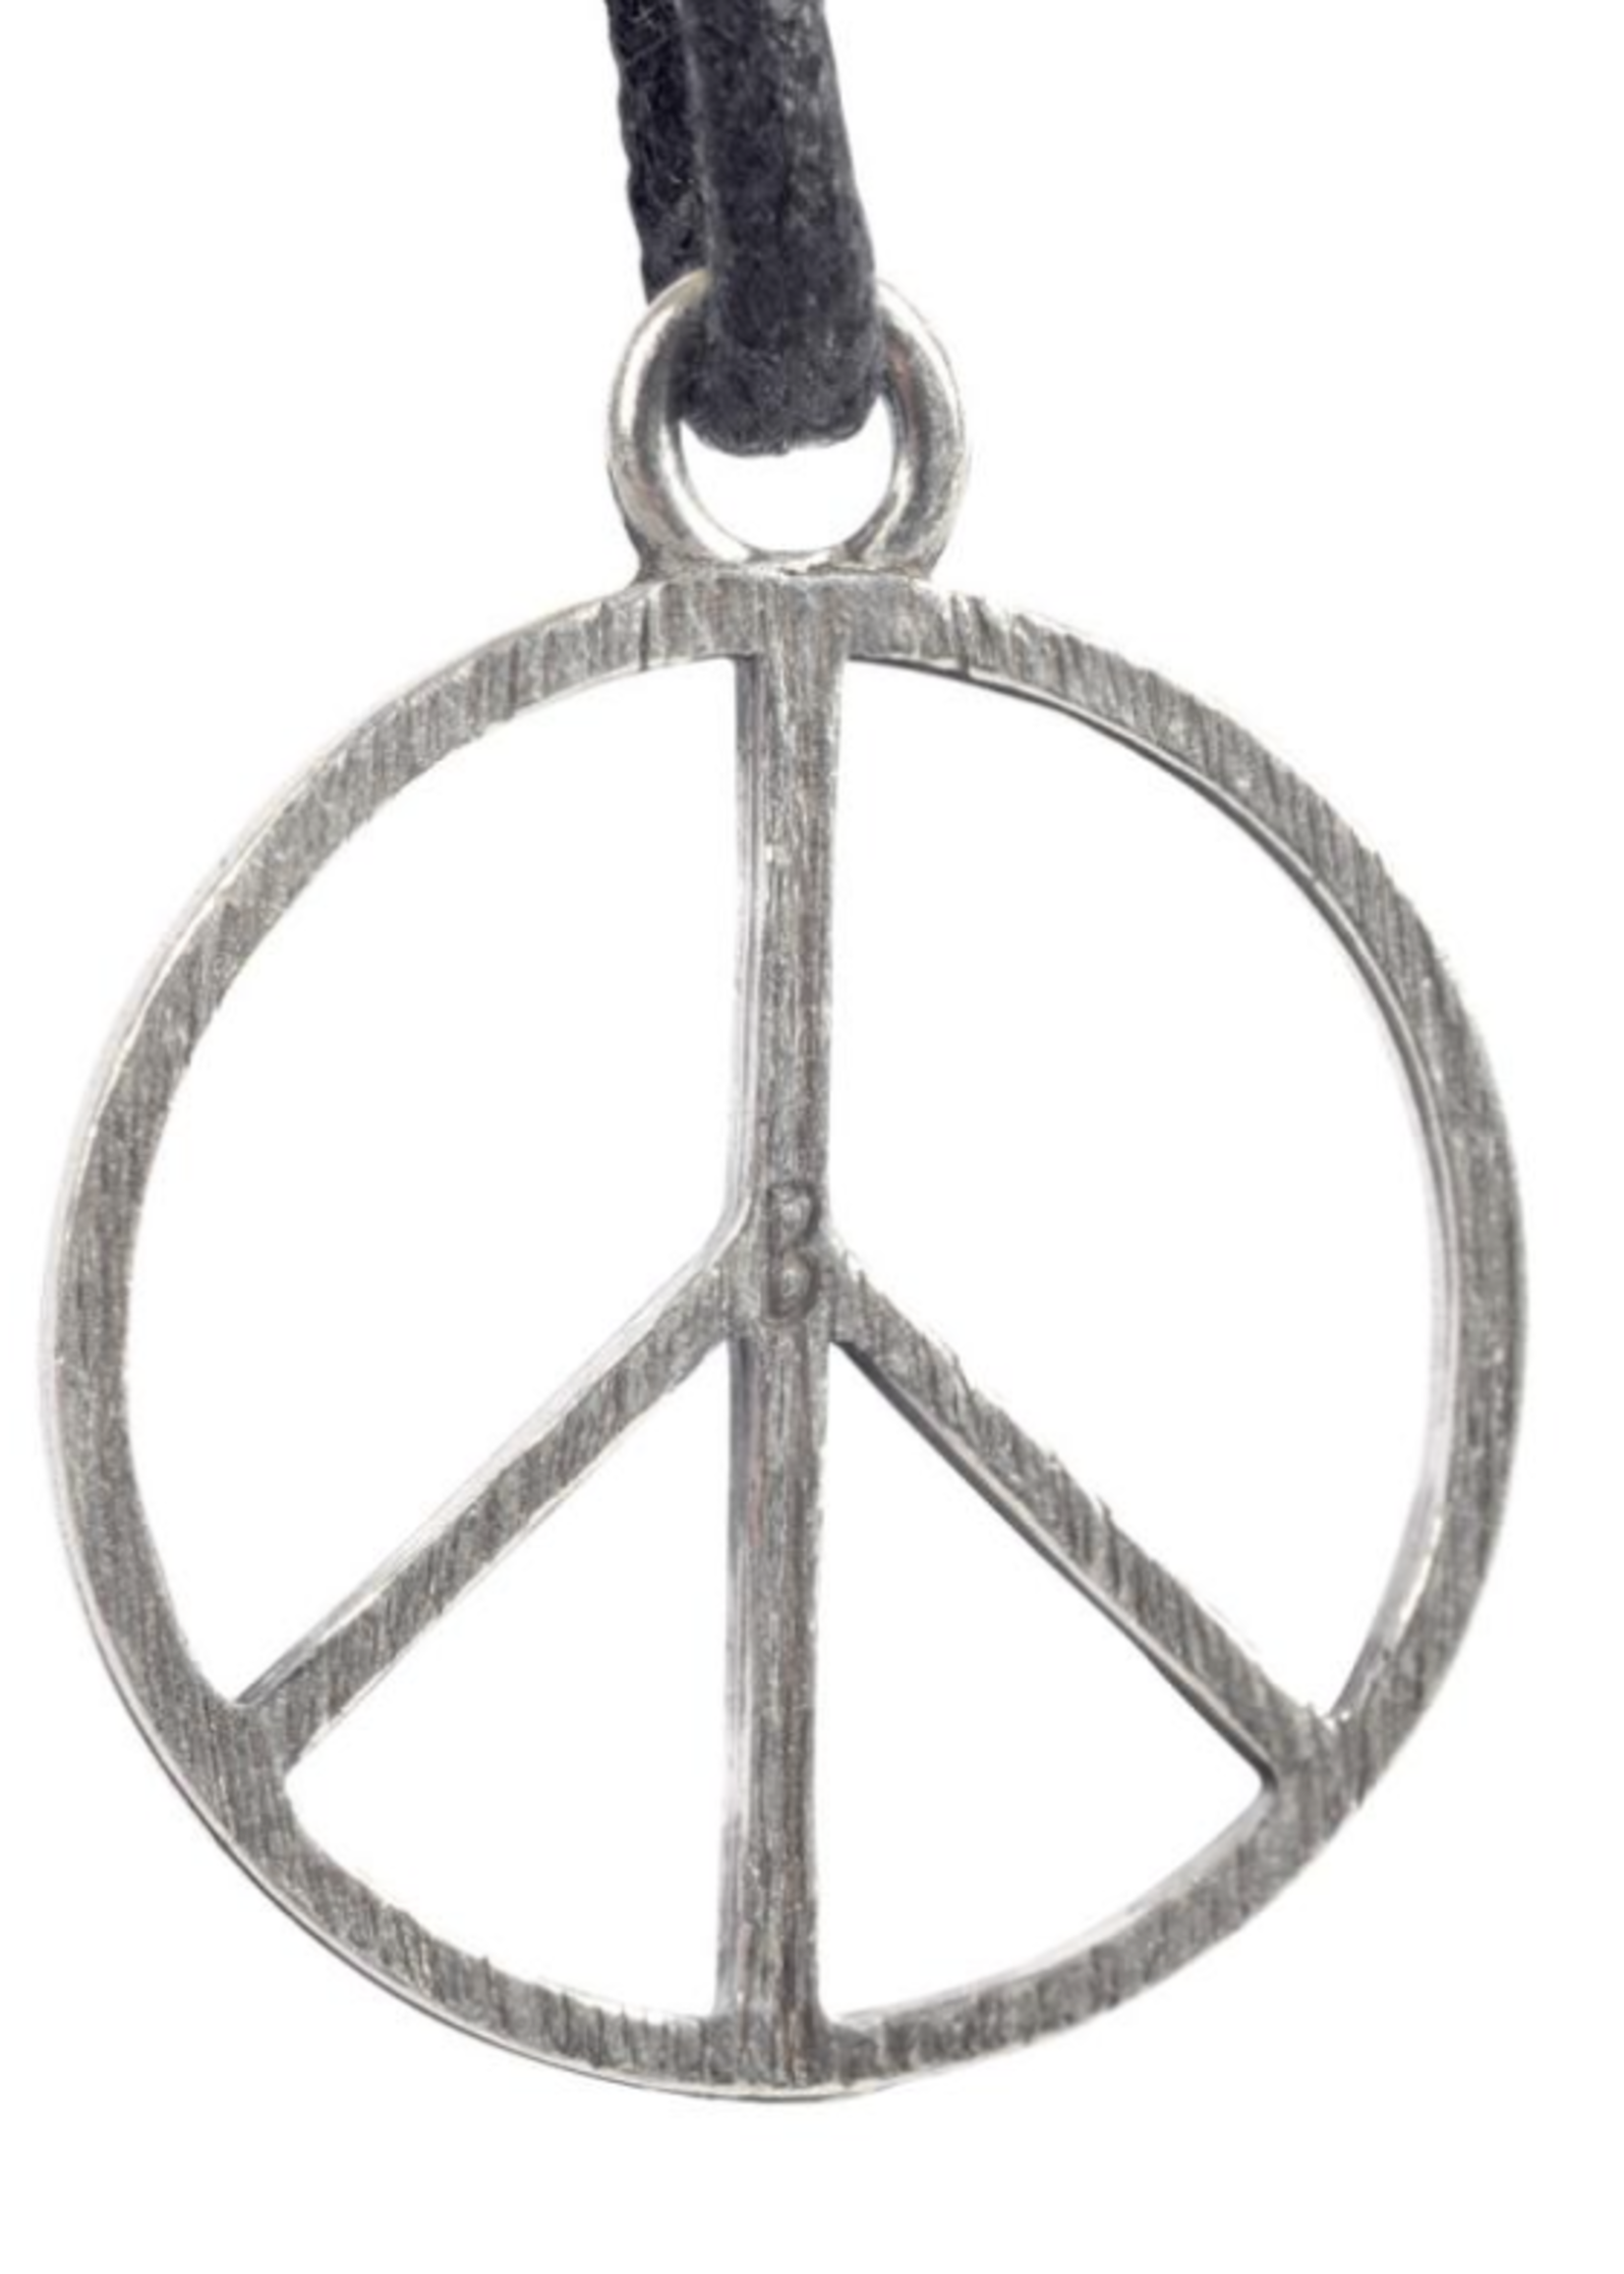 SILVER PEACE PENDANT WITH BLACK CHORD 1"